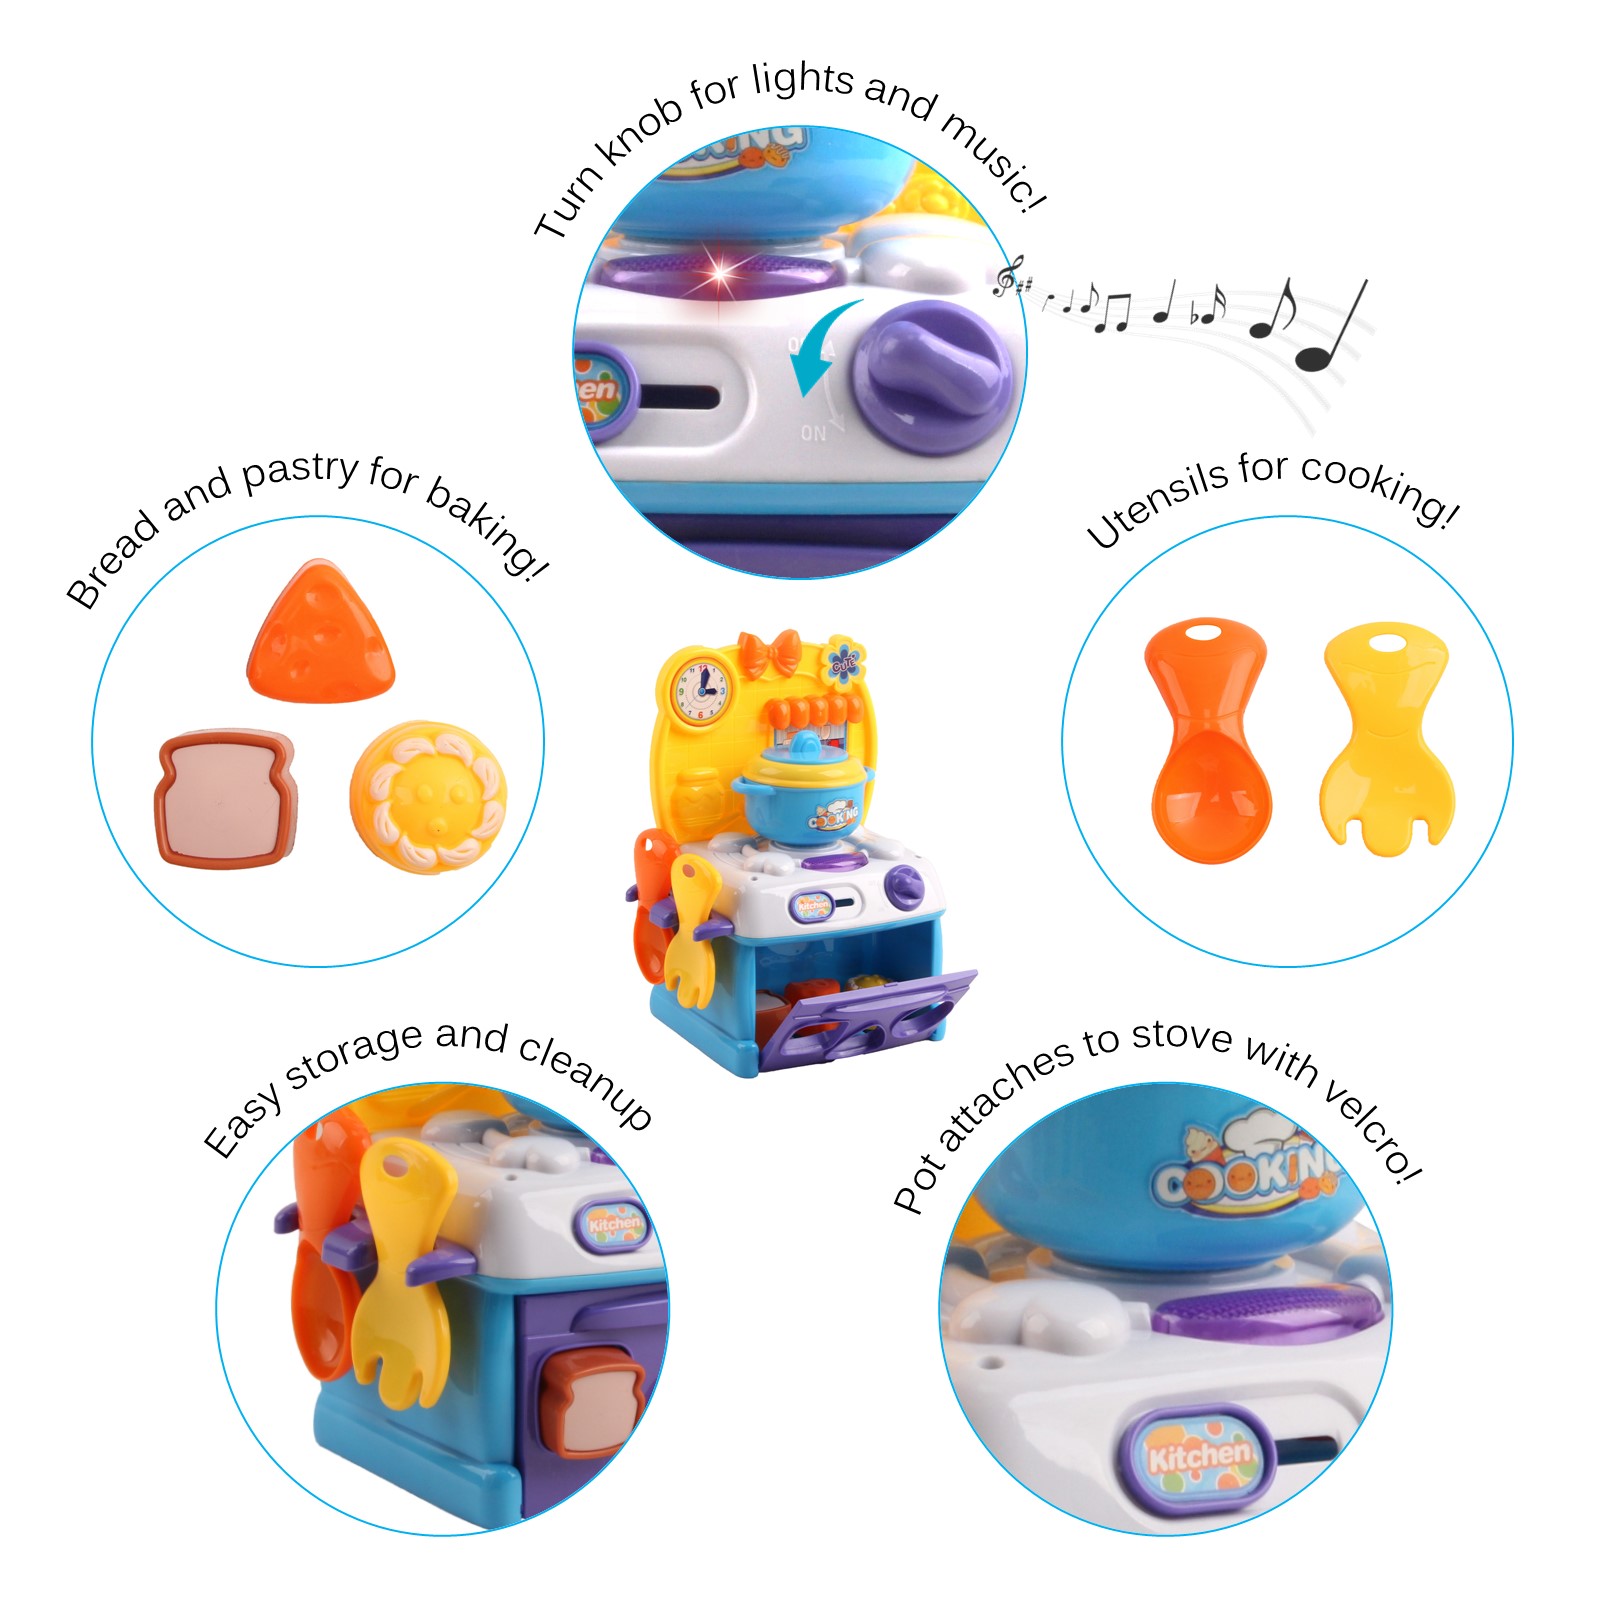 Vokodo Kids Kitchen Playset Compact Size With Light And Music Includes Oven Stove Pot And Food Pieces Pretend Play Chef Early Learning Preschool Cooking Toy Great Gift For Children Boys Girls Toddlers TK-25